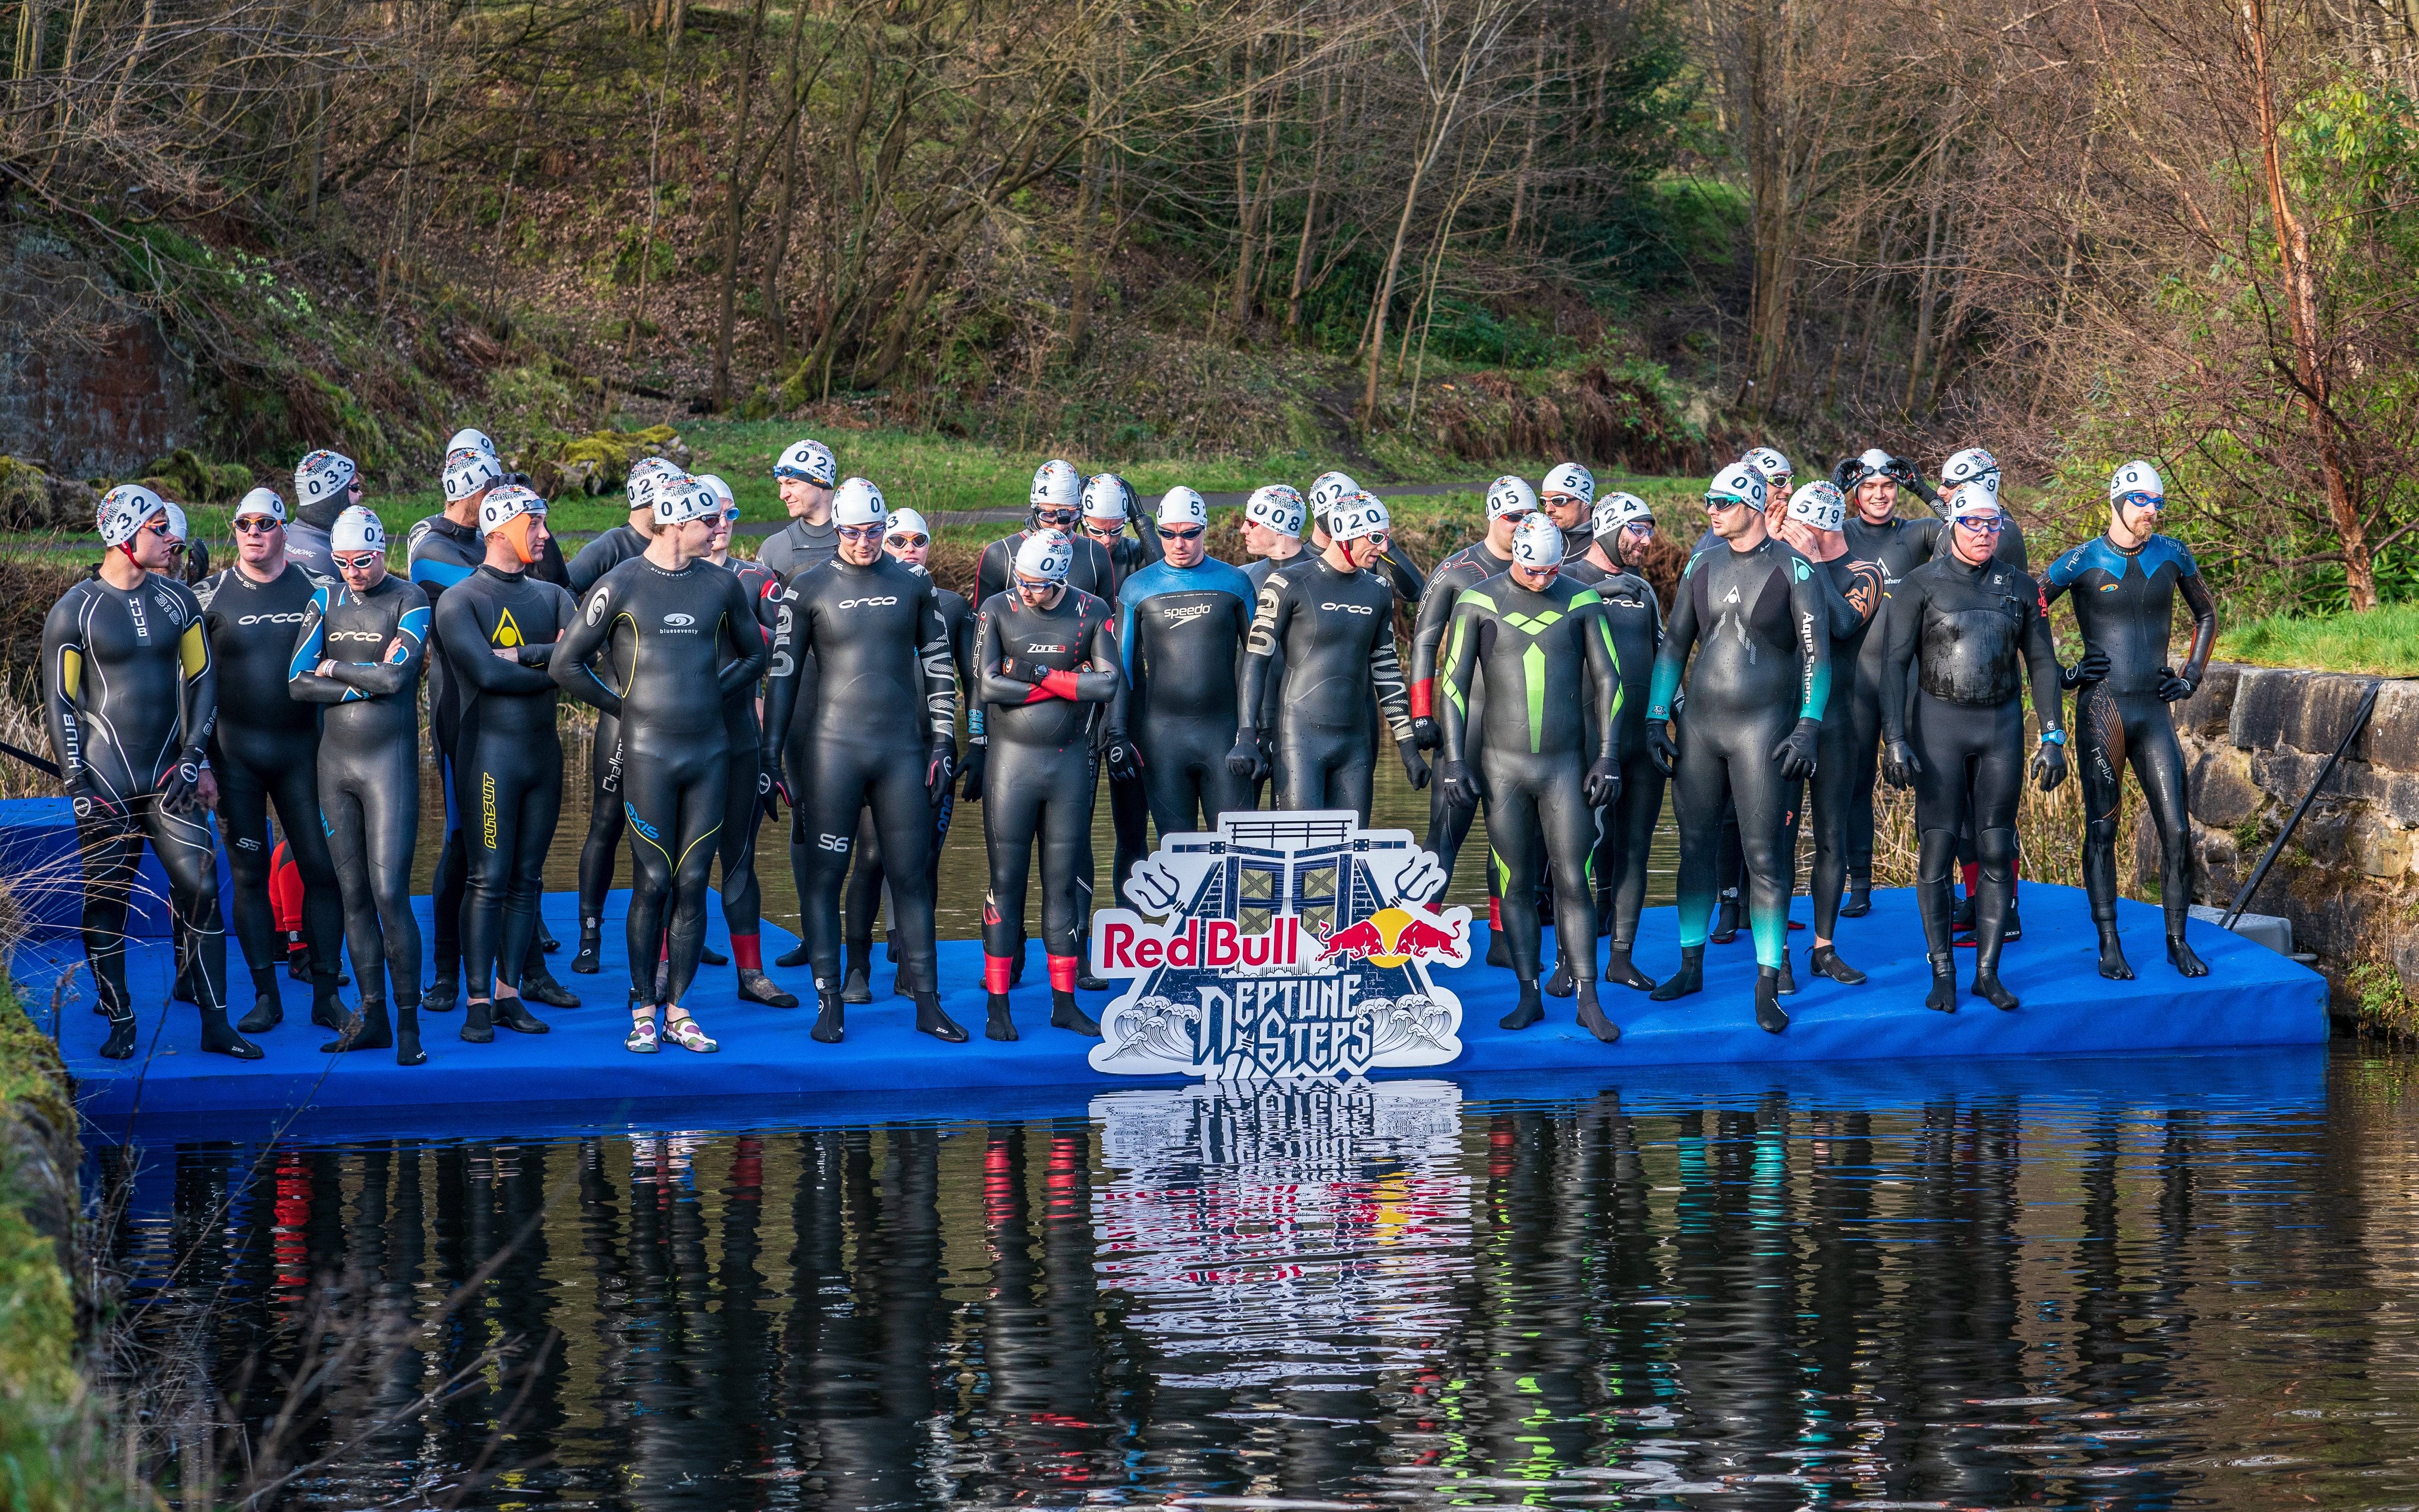 Competitors on the start line at Red Bull Neptune Steps 2019